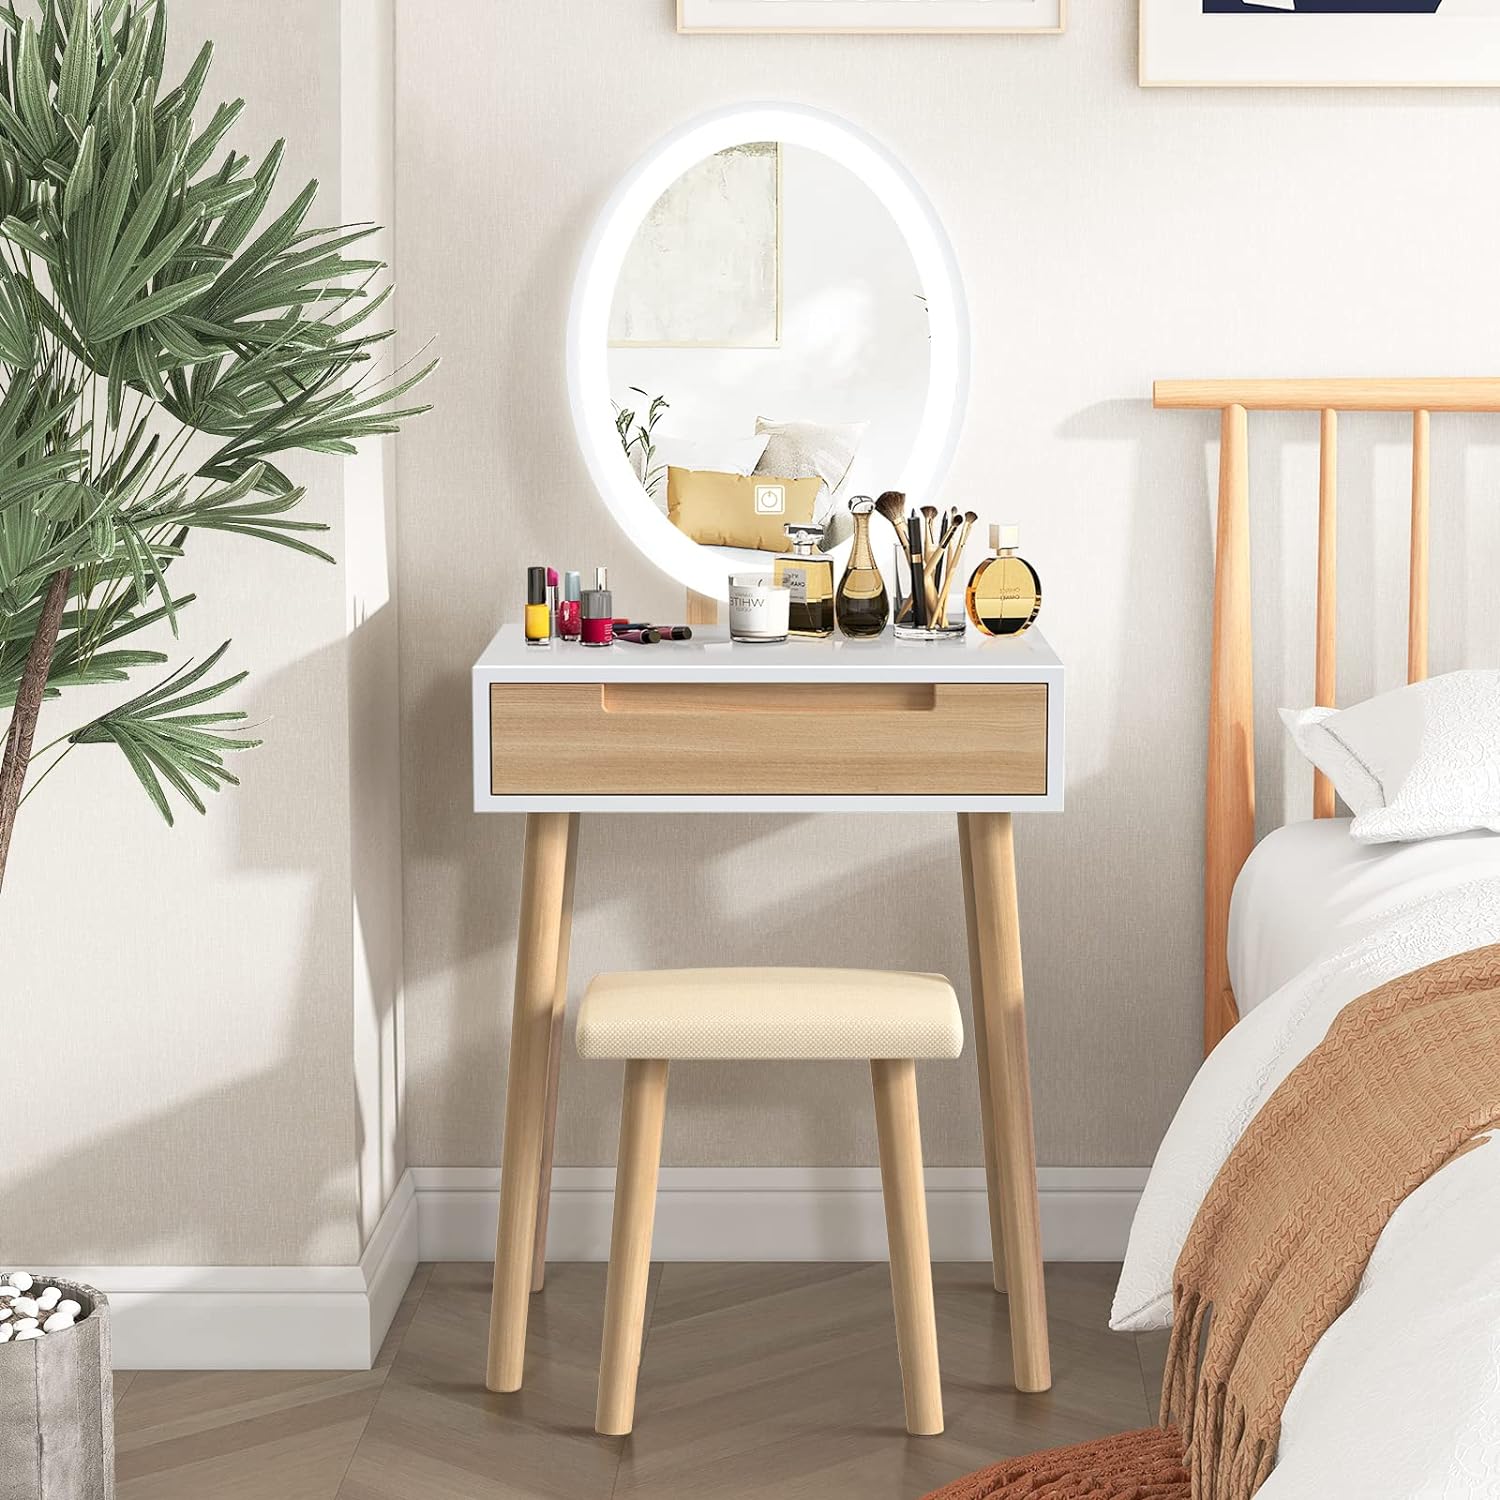 YOURLITE Makeup Vanity Table Set with 3 Modes Adjustable Lighted Mirror Cushioned Stool, Dressing Table for Small Space